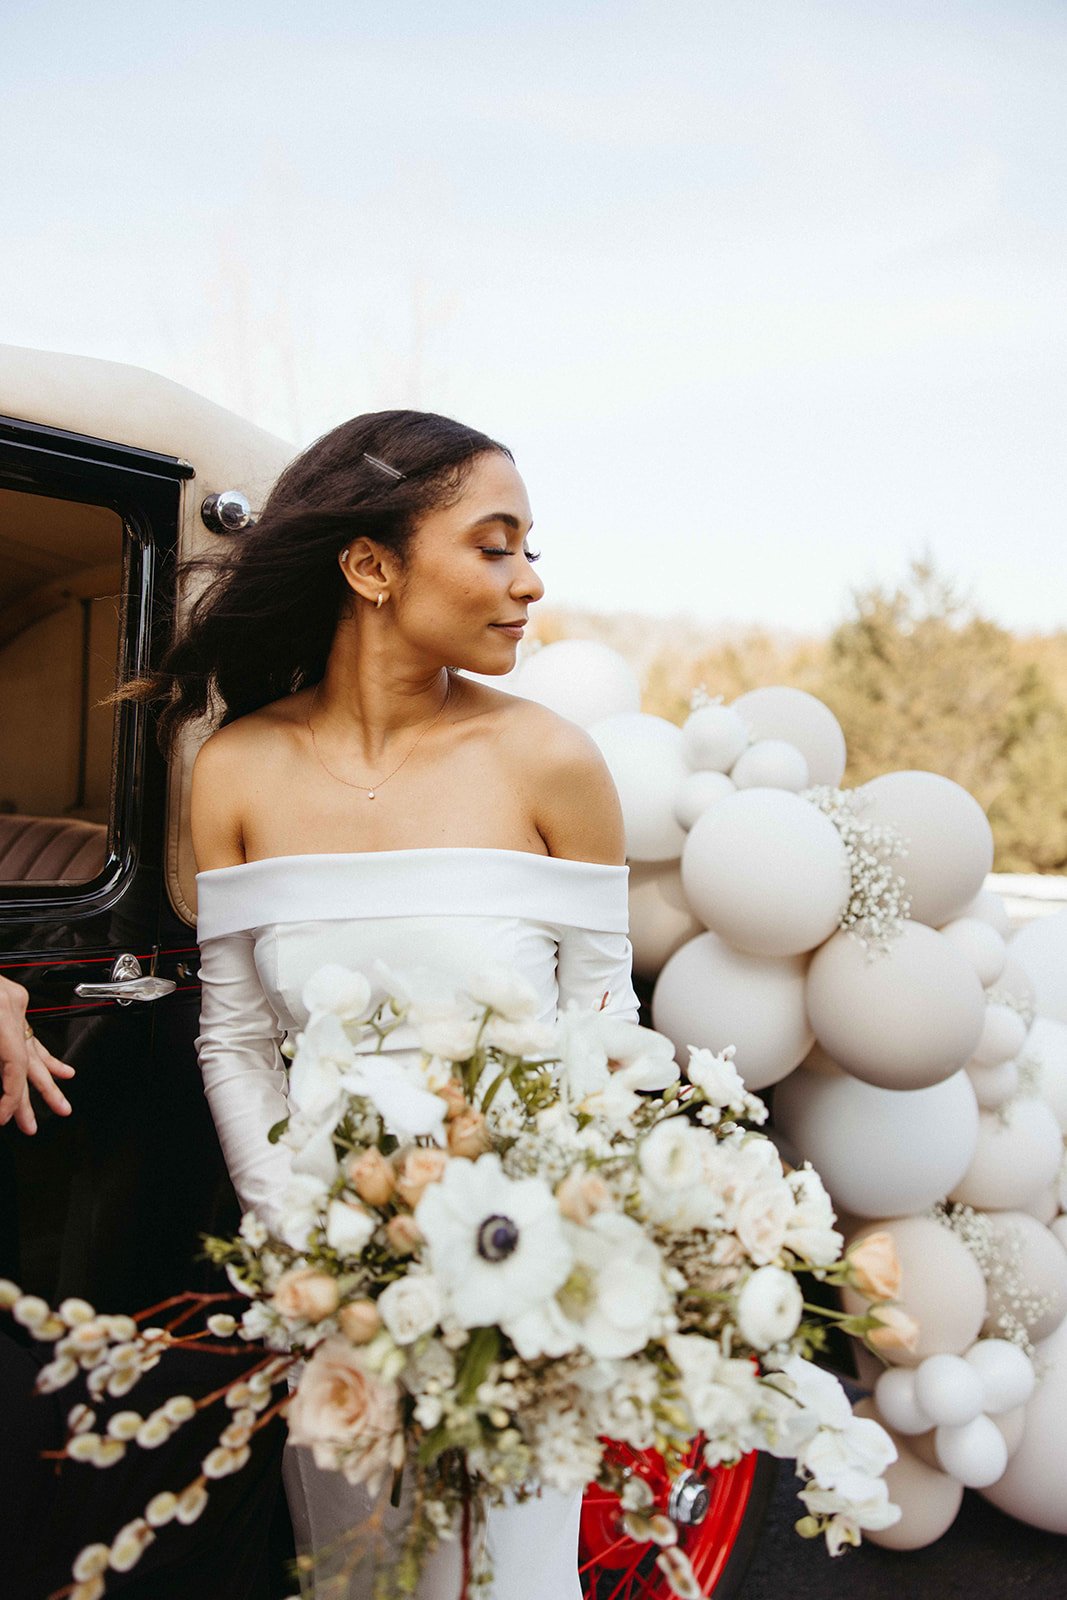 Bridal Photography with a vintage car near Branson MO